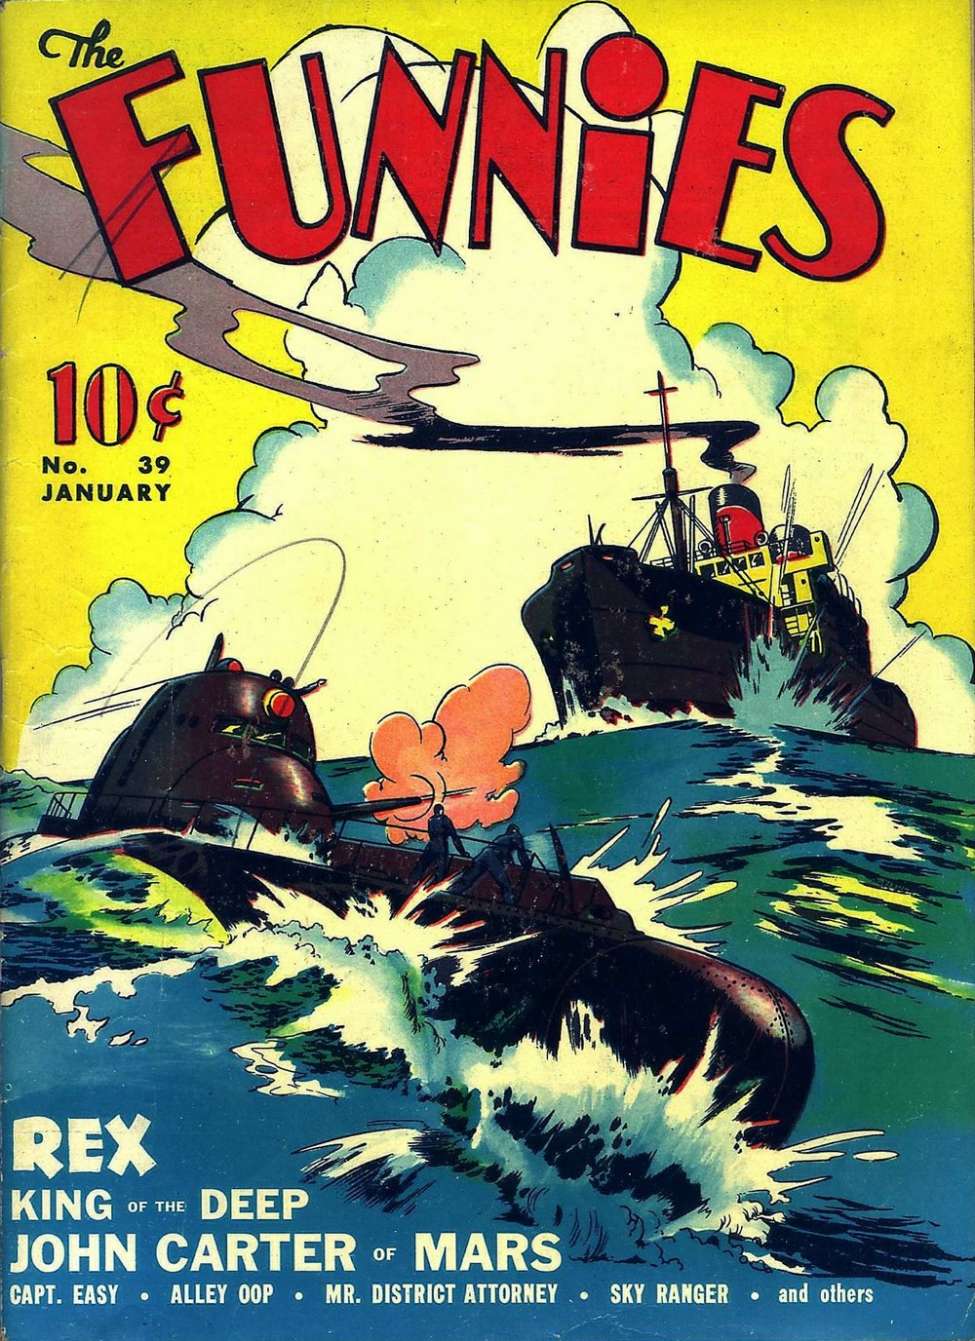 Book Cover For The Funnies 39